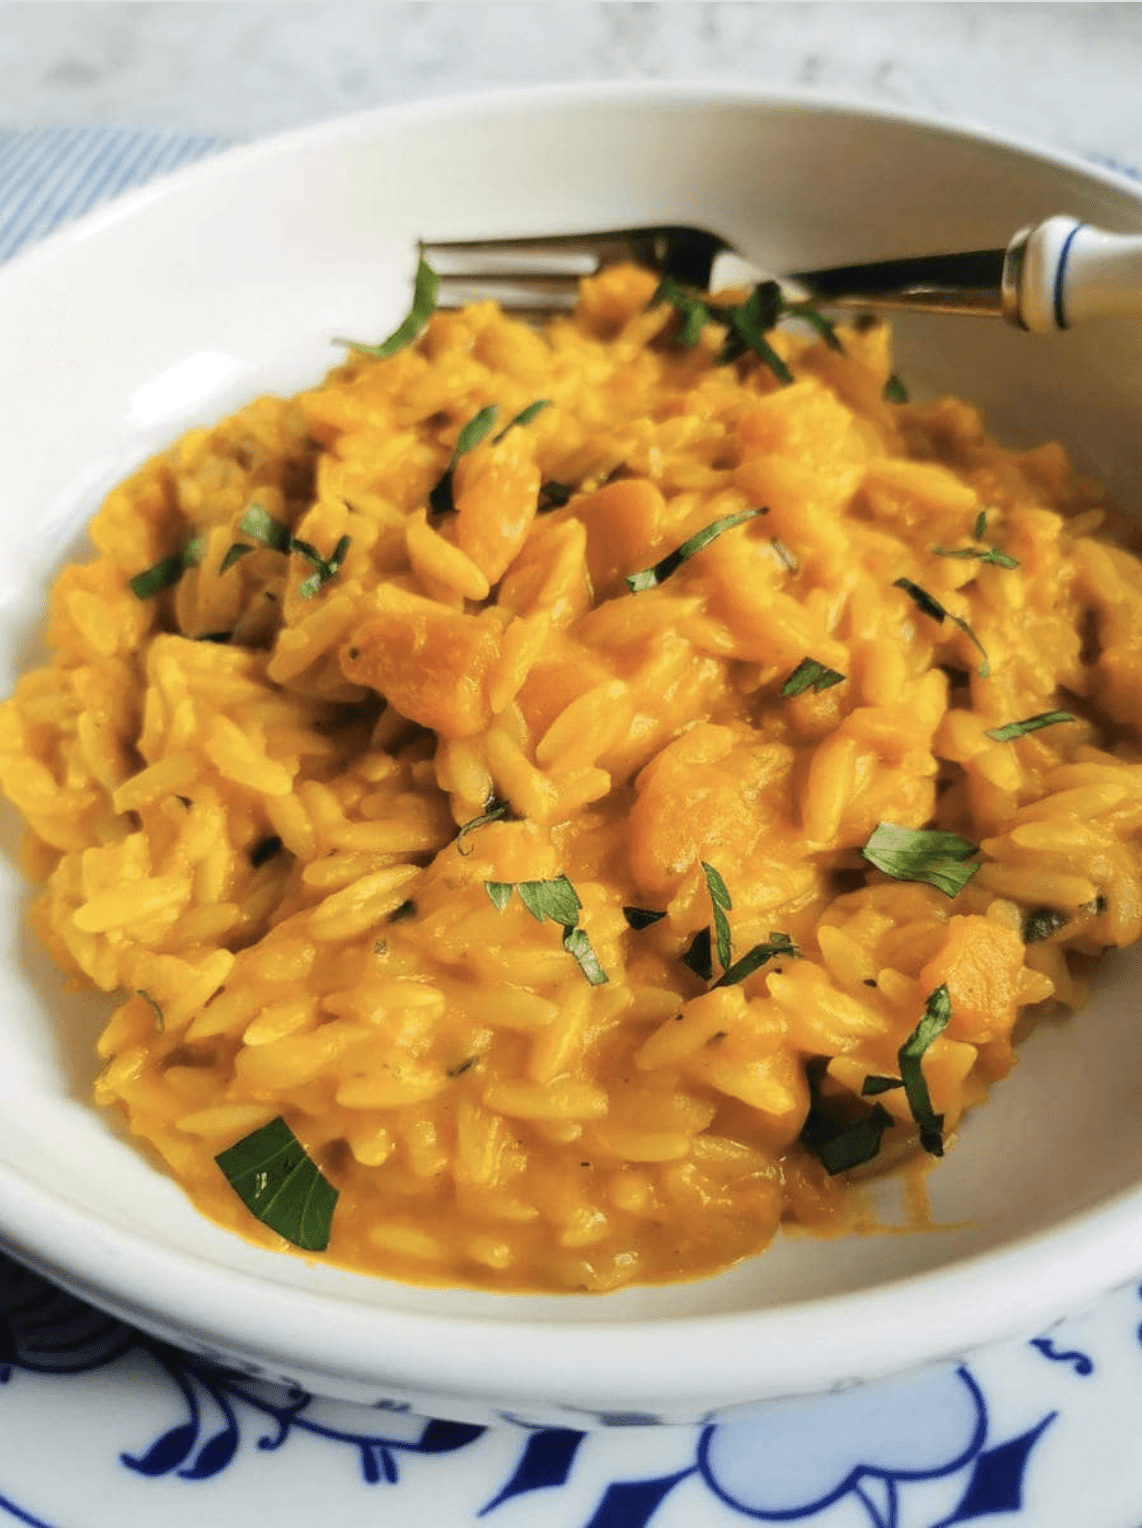 A close-up view of pasta risotto with kabocha squash in a white bowl.